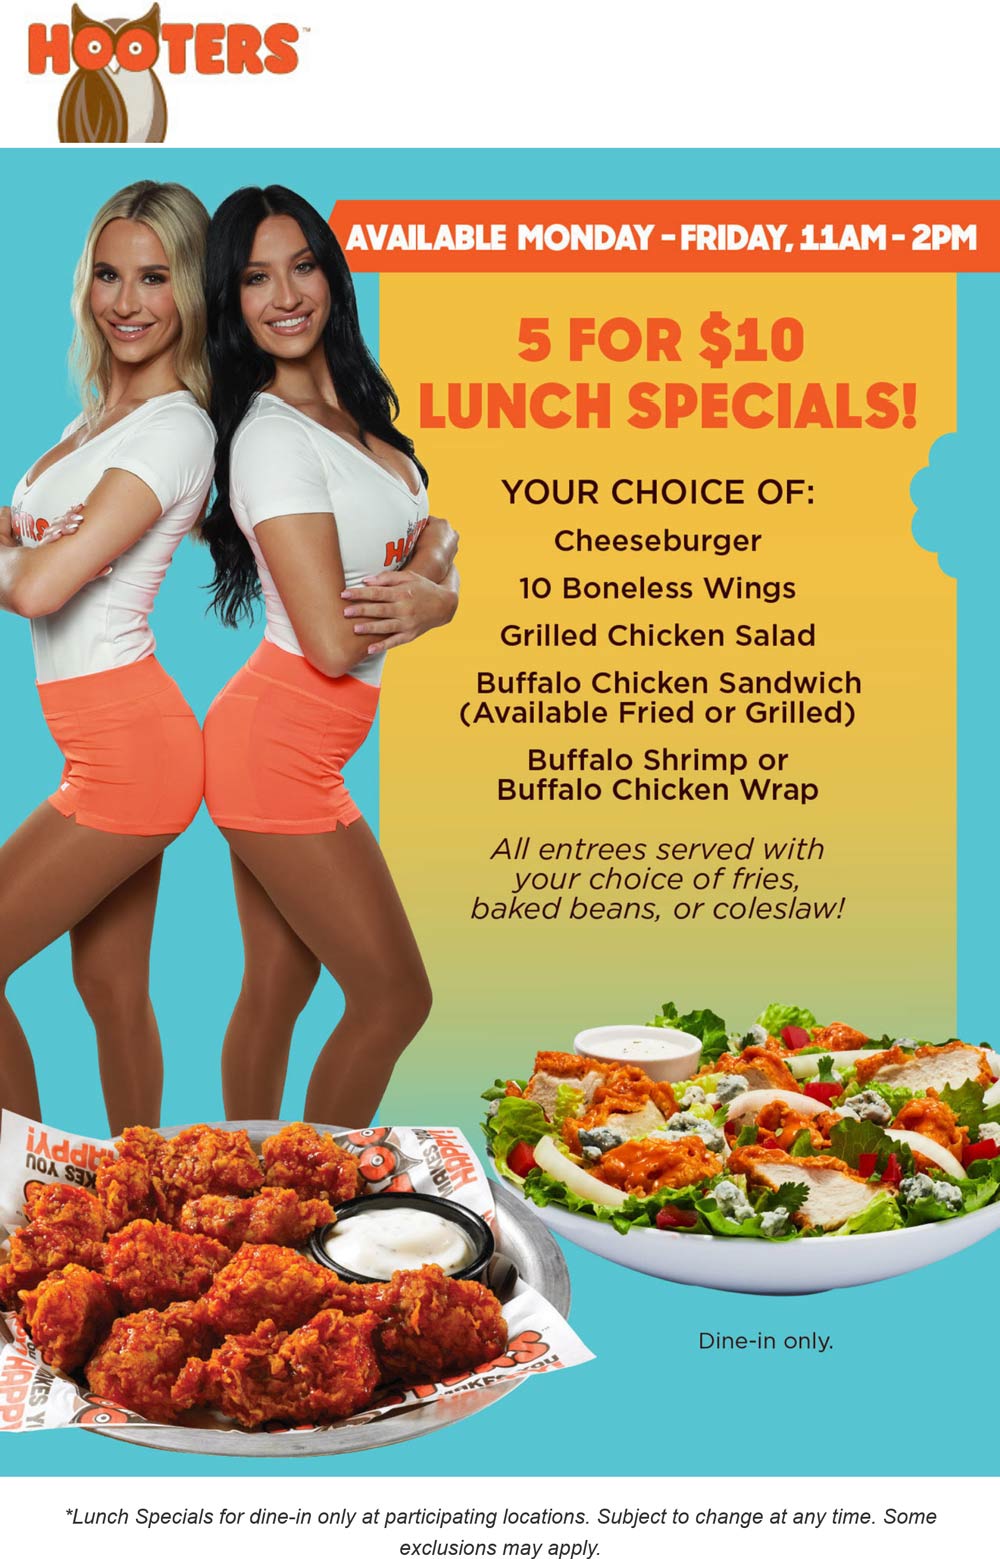 Hooters restaurants Coupon  Various $10 lunch specials at Hooters #hooters 